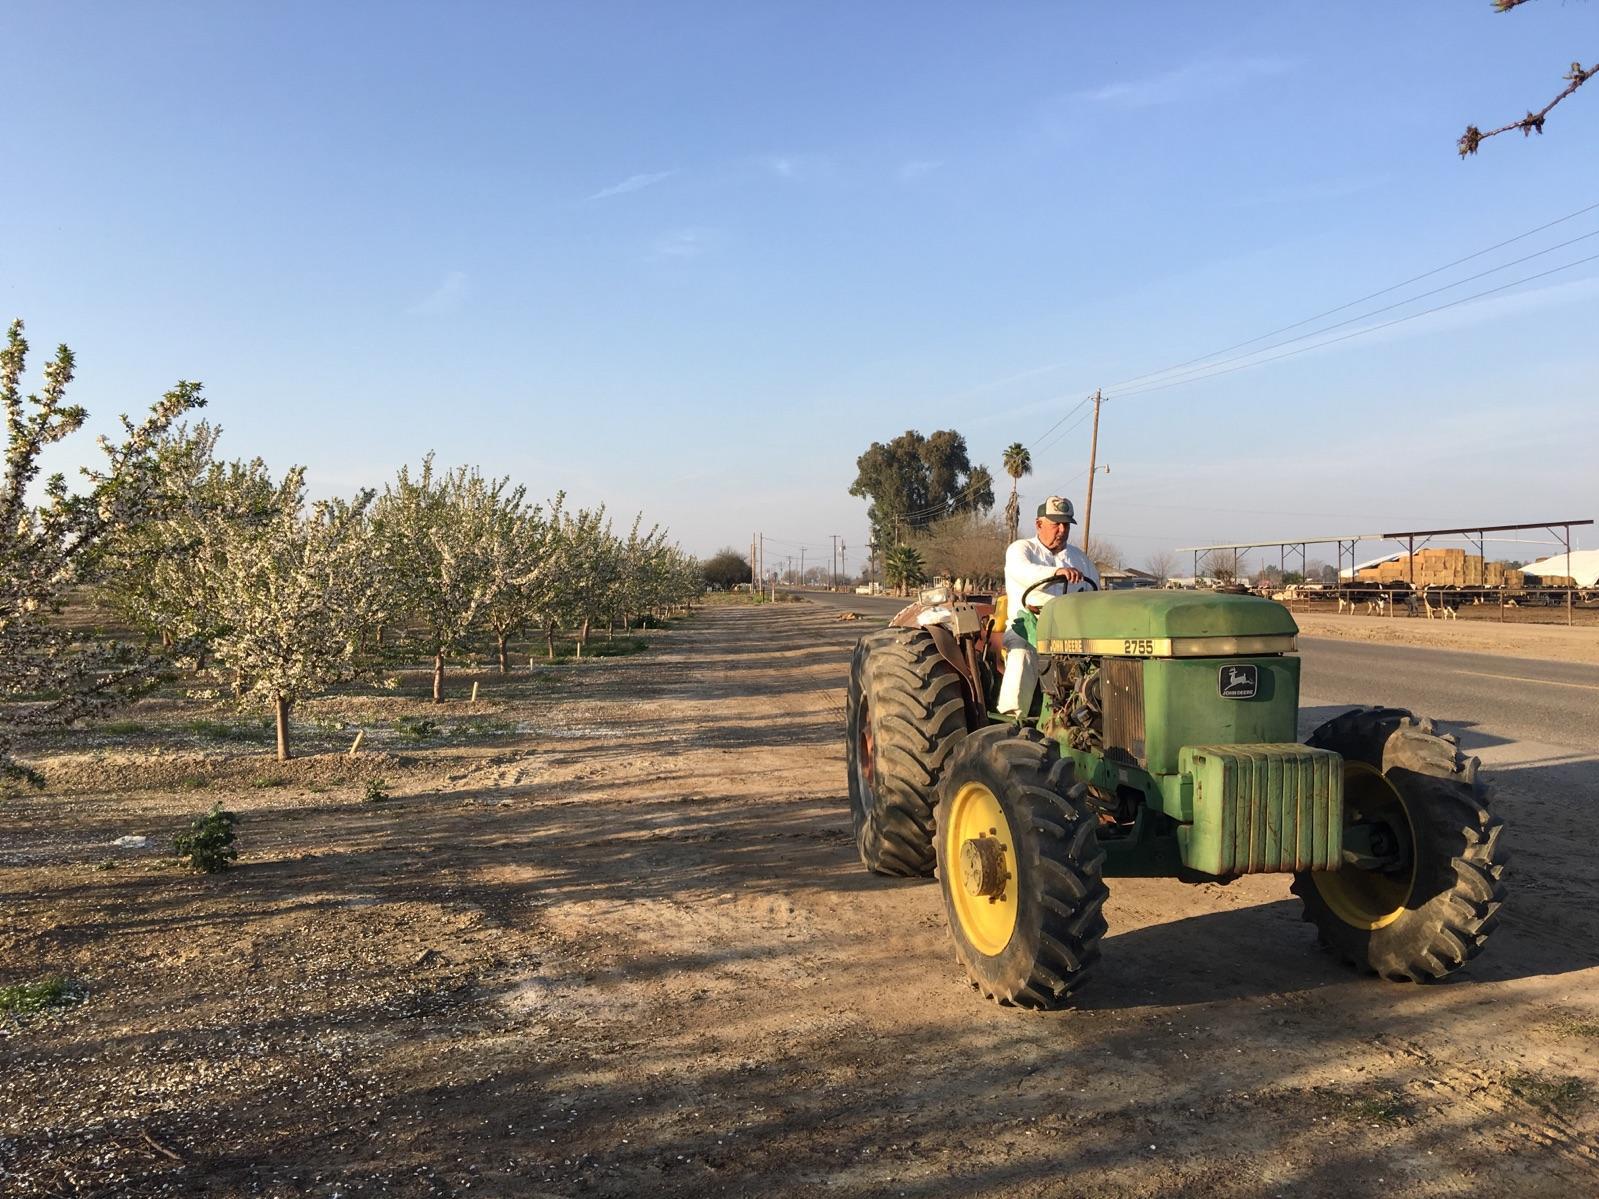 Ben Barra farms 18 acres of Independence almonds southwest of Fresno, Calif. He says this will be his last foray into farming.